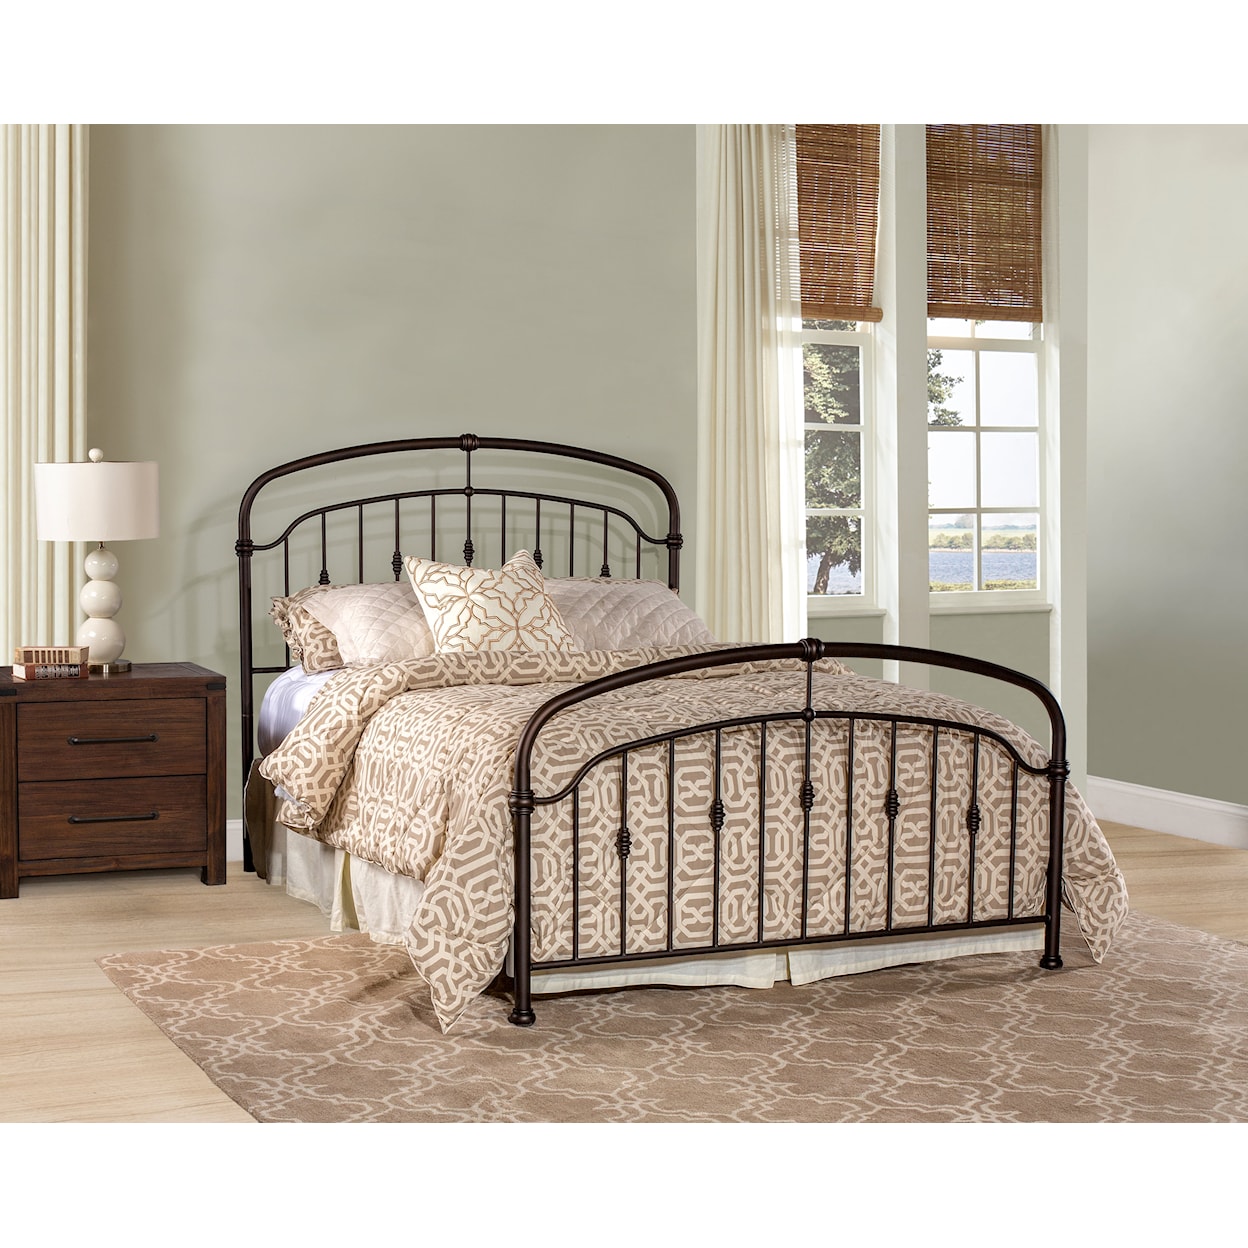 Hillsdale Pearson Full Bed